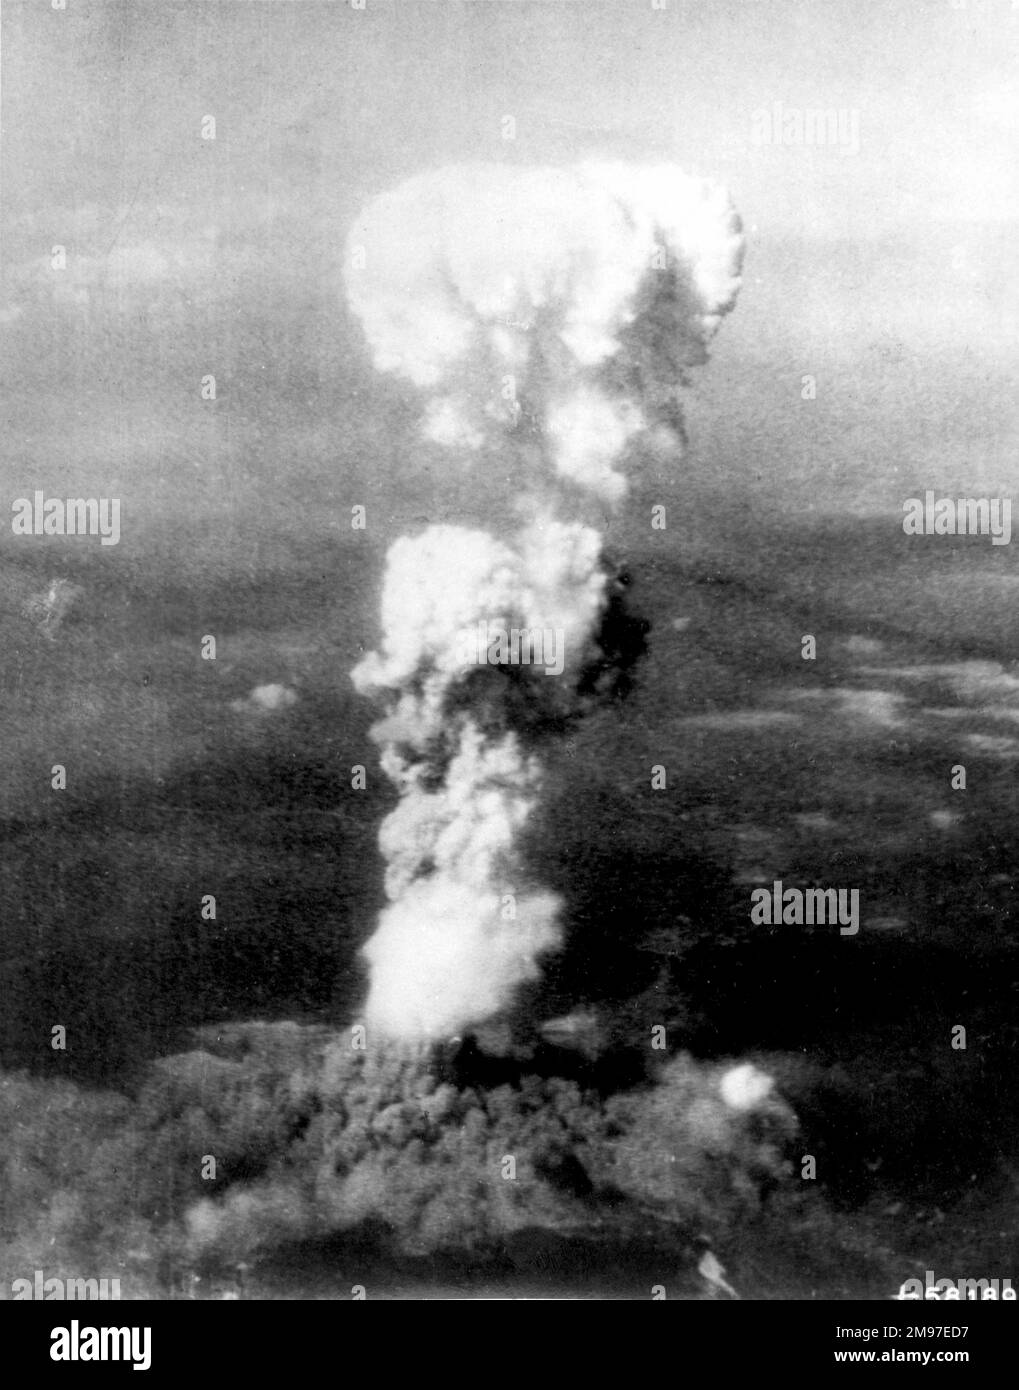 Boeing B-29 of 509th Composite Grp, 20th Air Force dropped atomic bomb on Hiroshima, 5 Aug 1945. Stock Photo